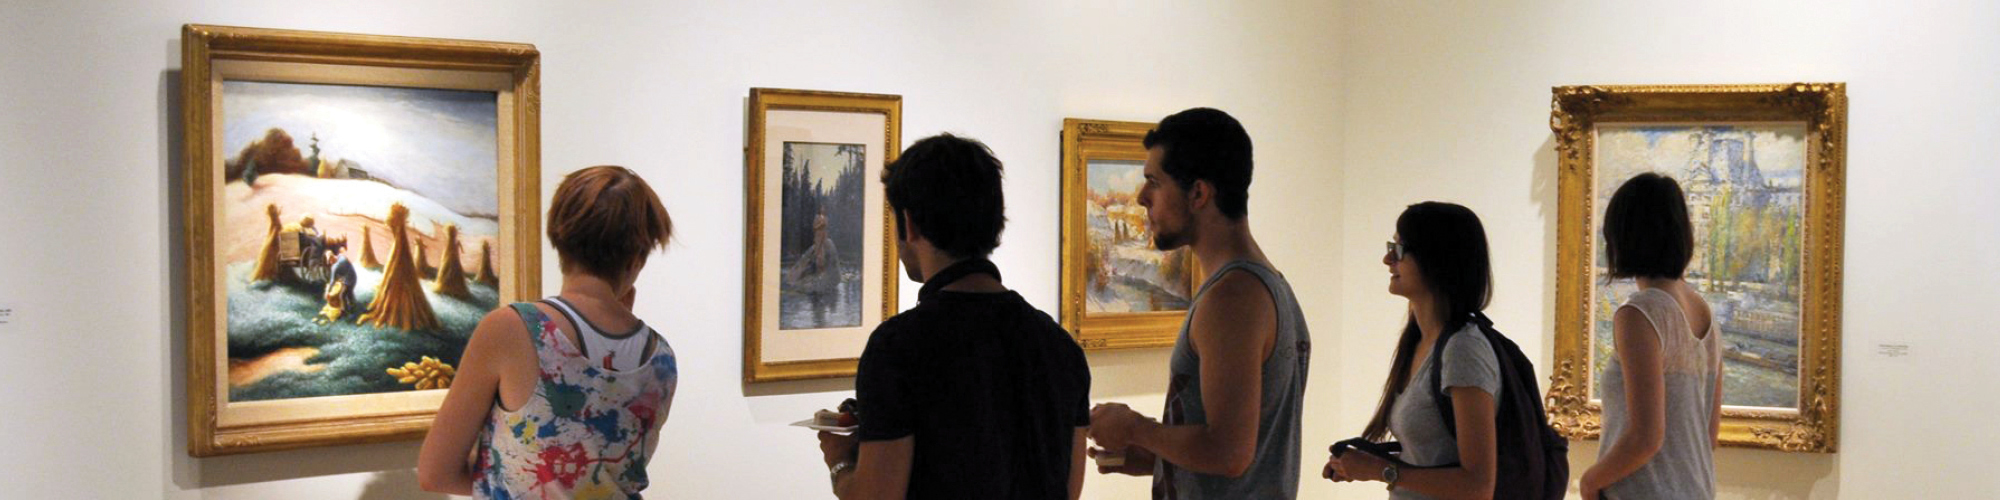 Students look at paintings hanging on the wall inside the Forsyth Galleries.